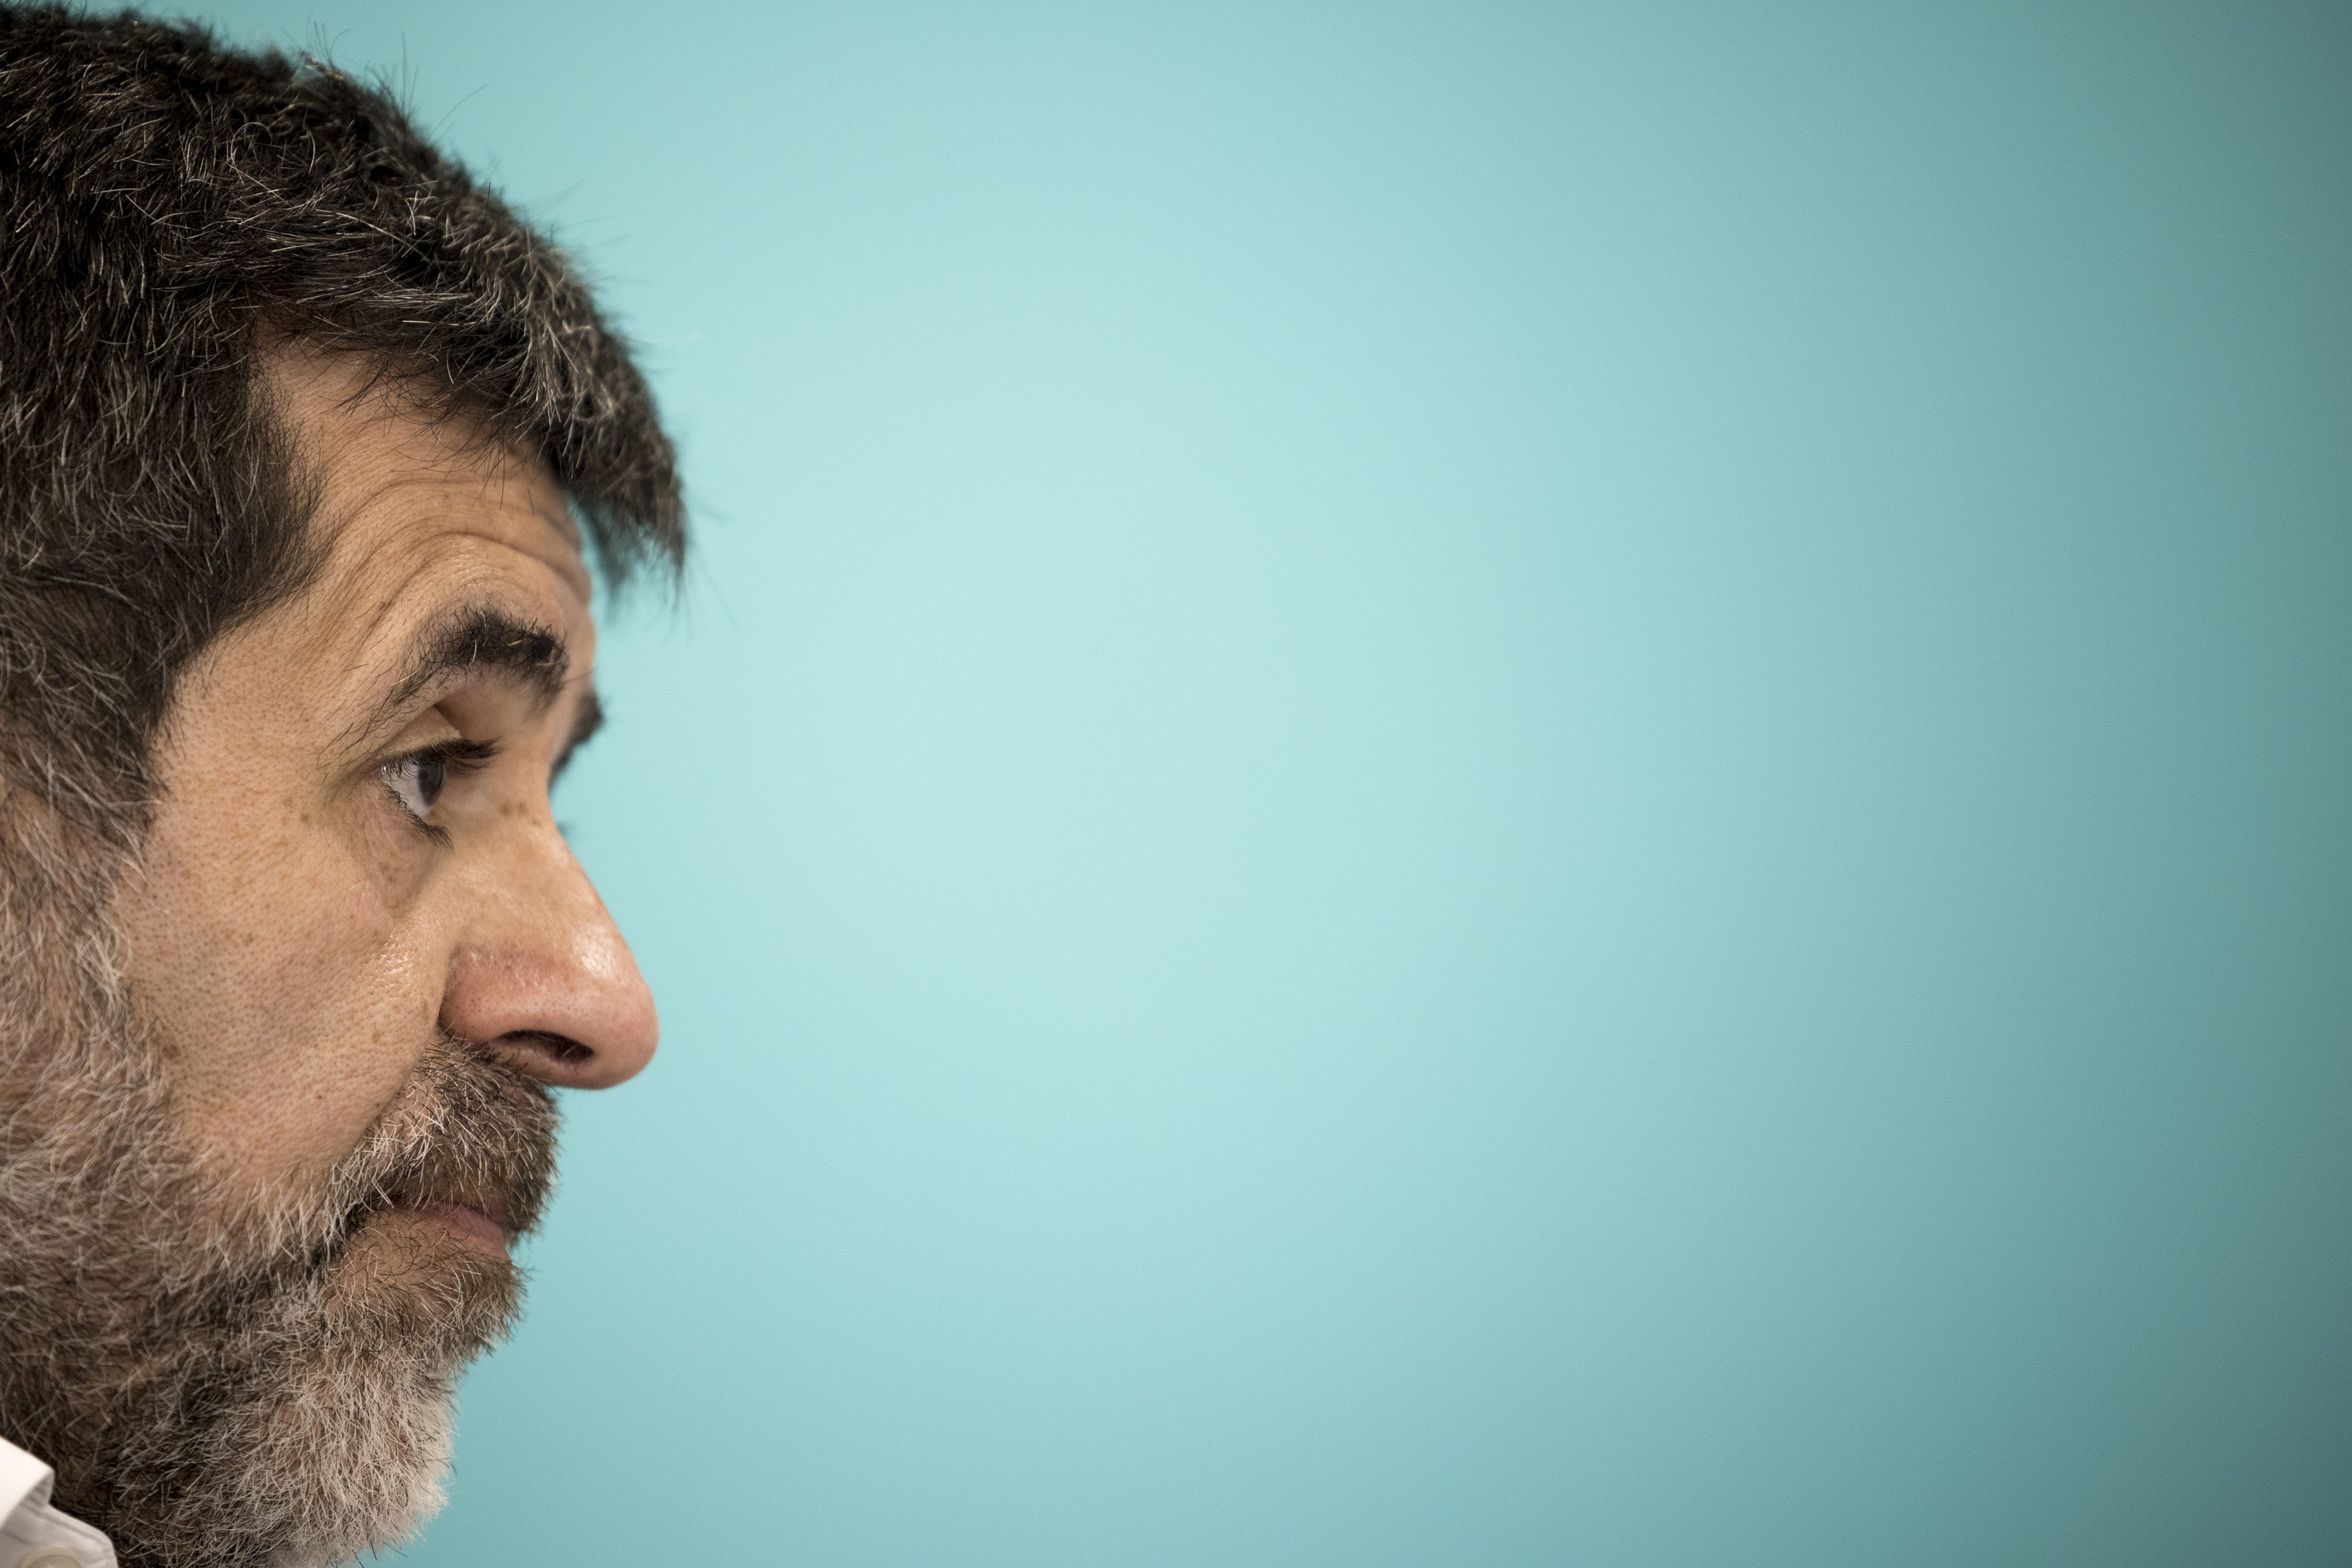 Jordi Sànchez: "The accord is a great victory. The repression has not beaten us"